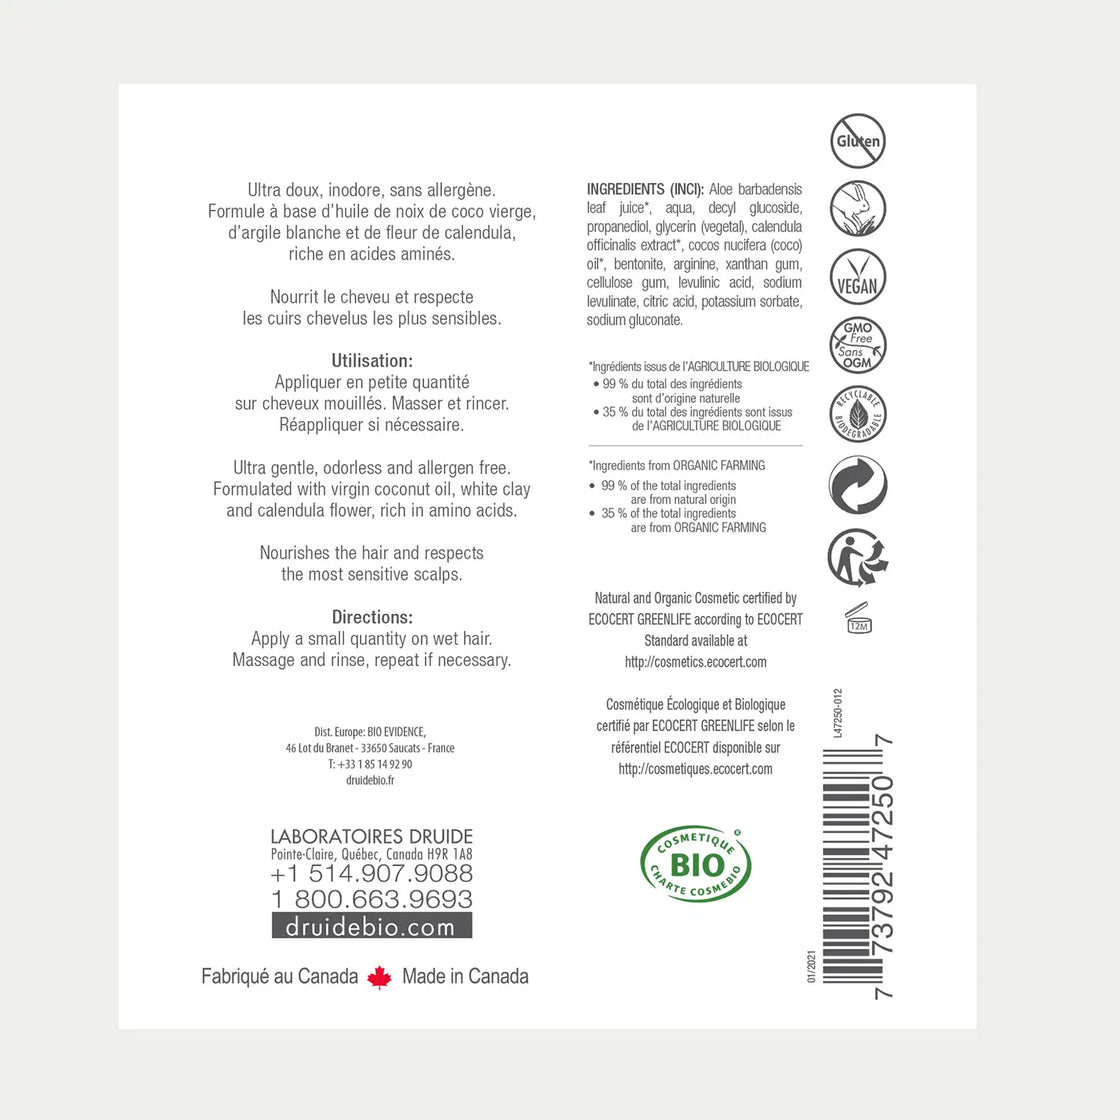 Druide Pur&Pure Organic sensitive shampoo packaging label with product benefits, ingredients, certifications, and origin.